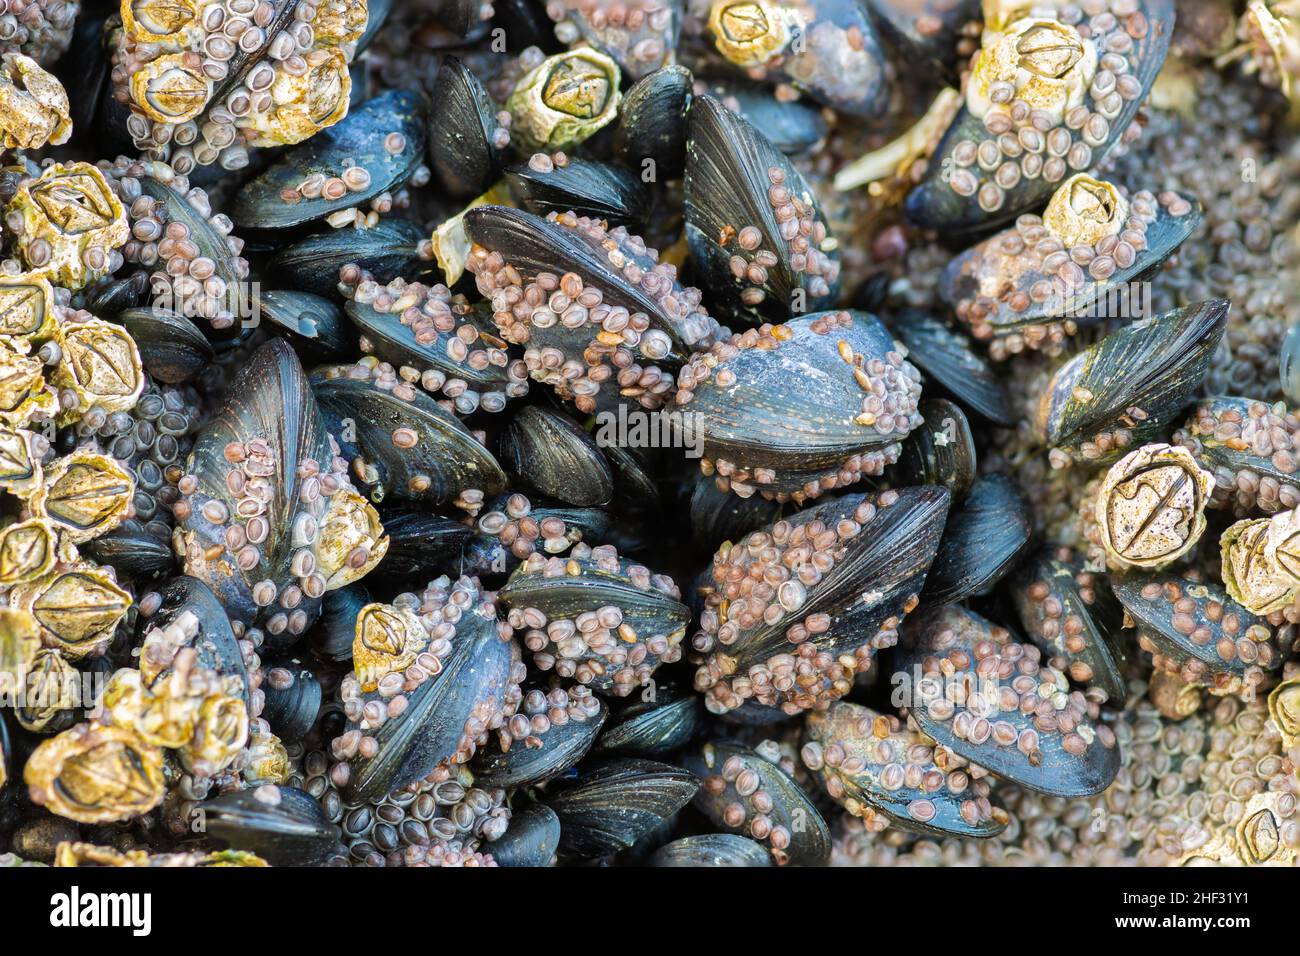 Closeup of baby mussels covered in barnacles Stock Photo